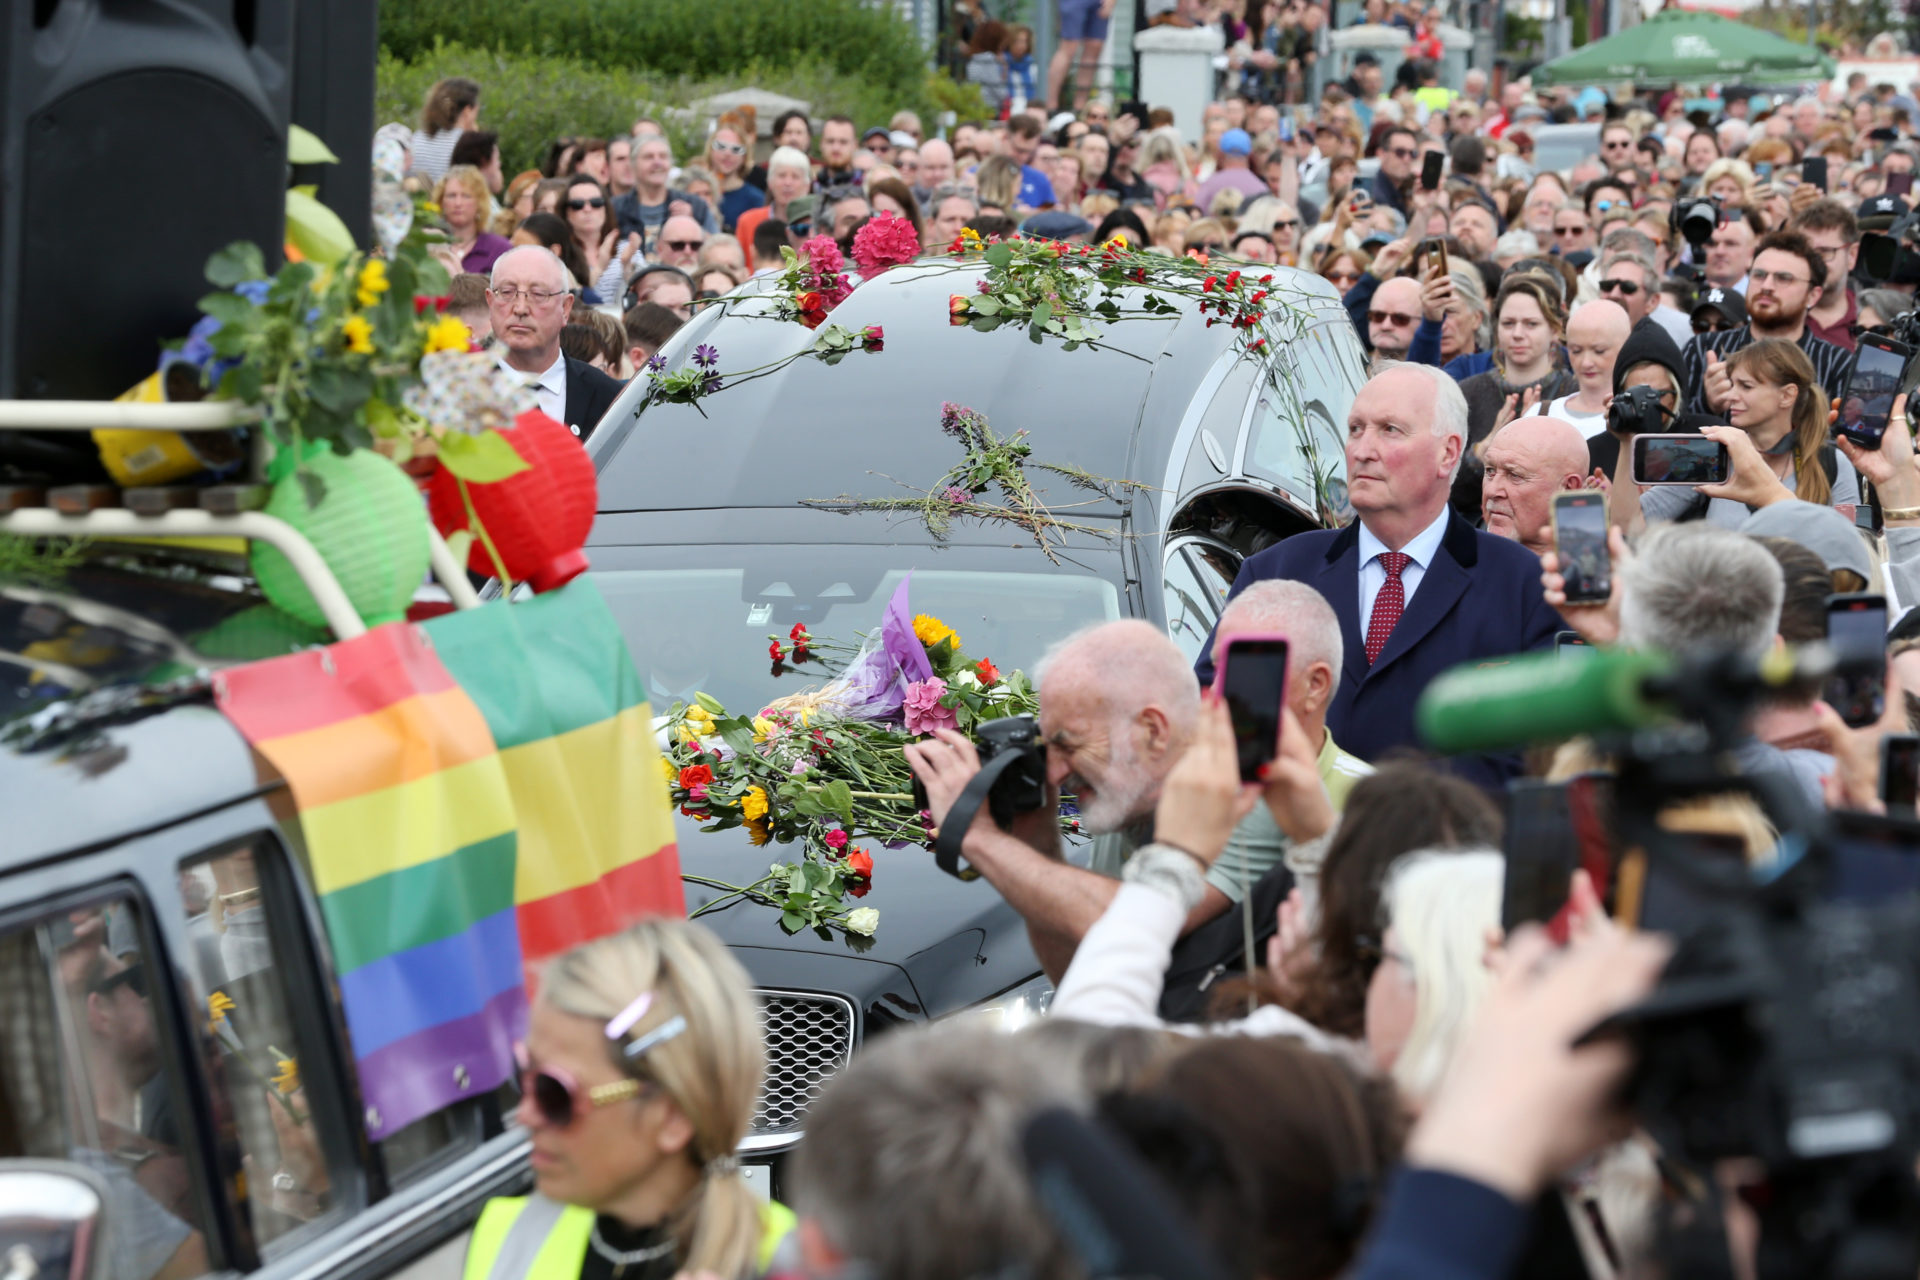 The hearse carrying Sinead O'Connor's body passes by crowds of well-wishers and mourners lining the Bray seafront ahead of her funeral